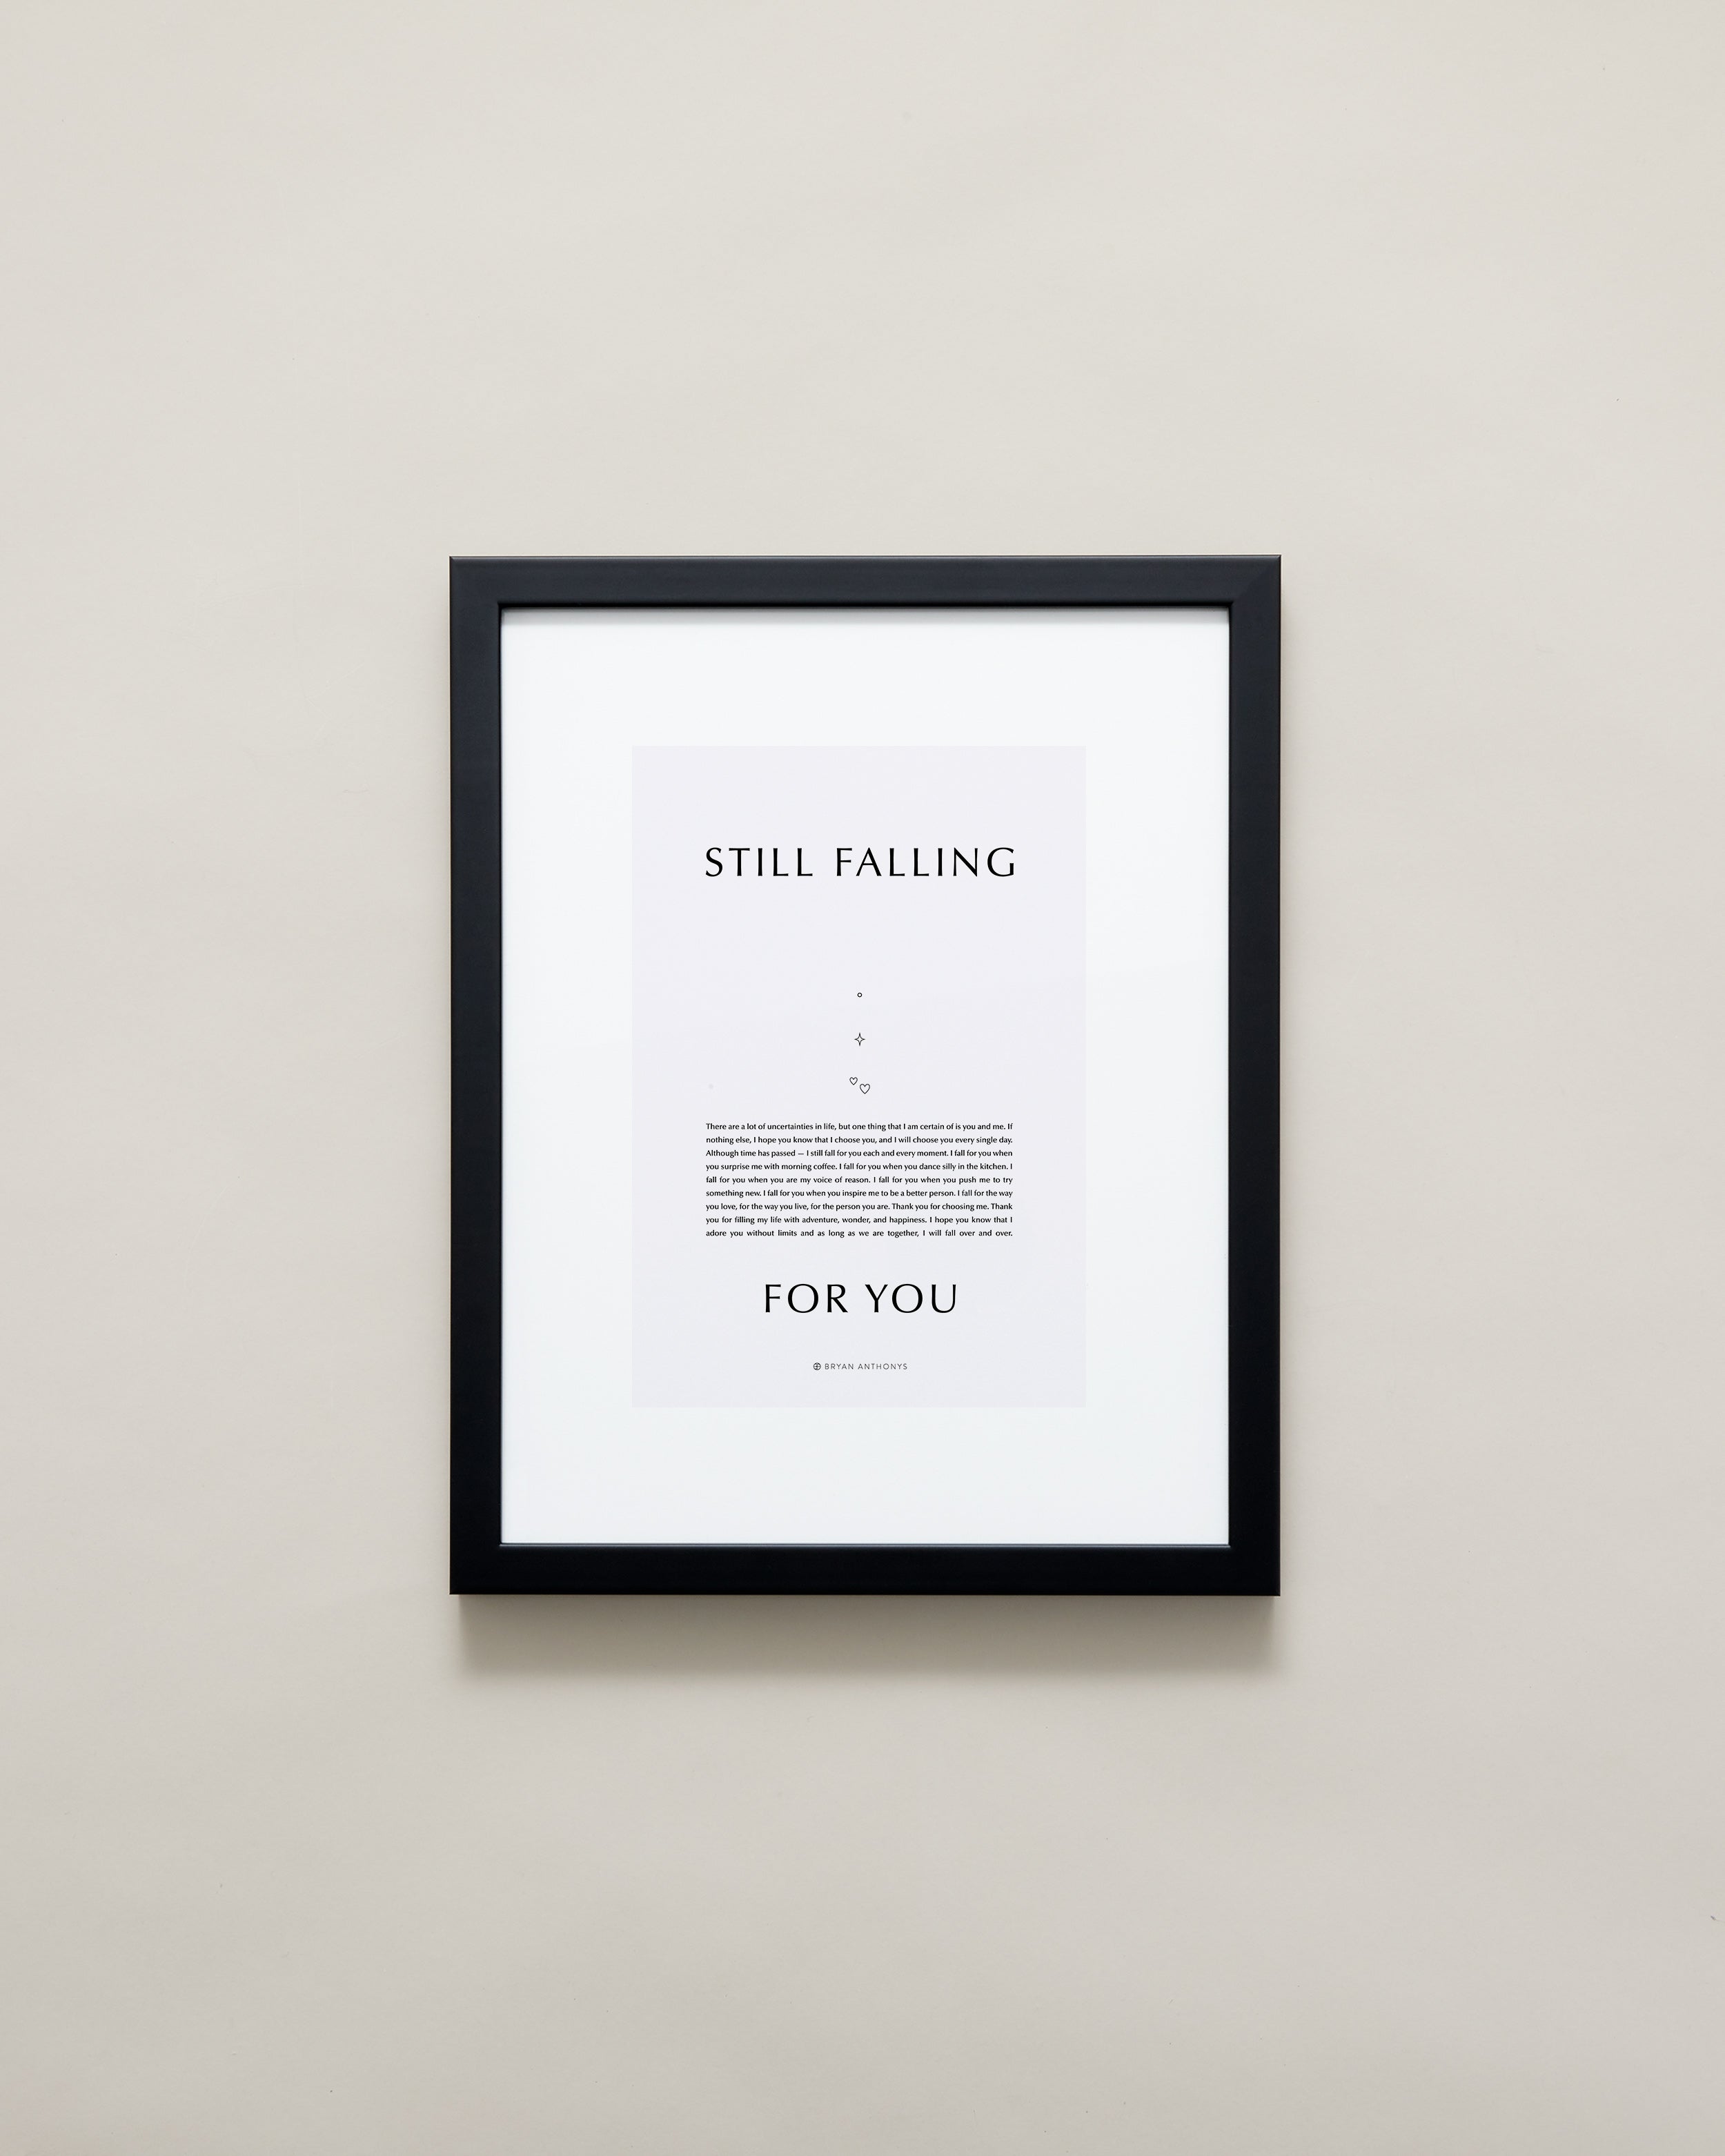 Bryan Anthonys Home Decor Purposeful Prints Still Falling For You Iconic Framed Print Gray Art With Black Frame 11x14